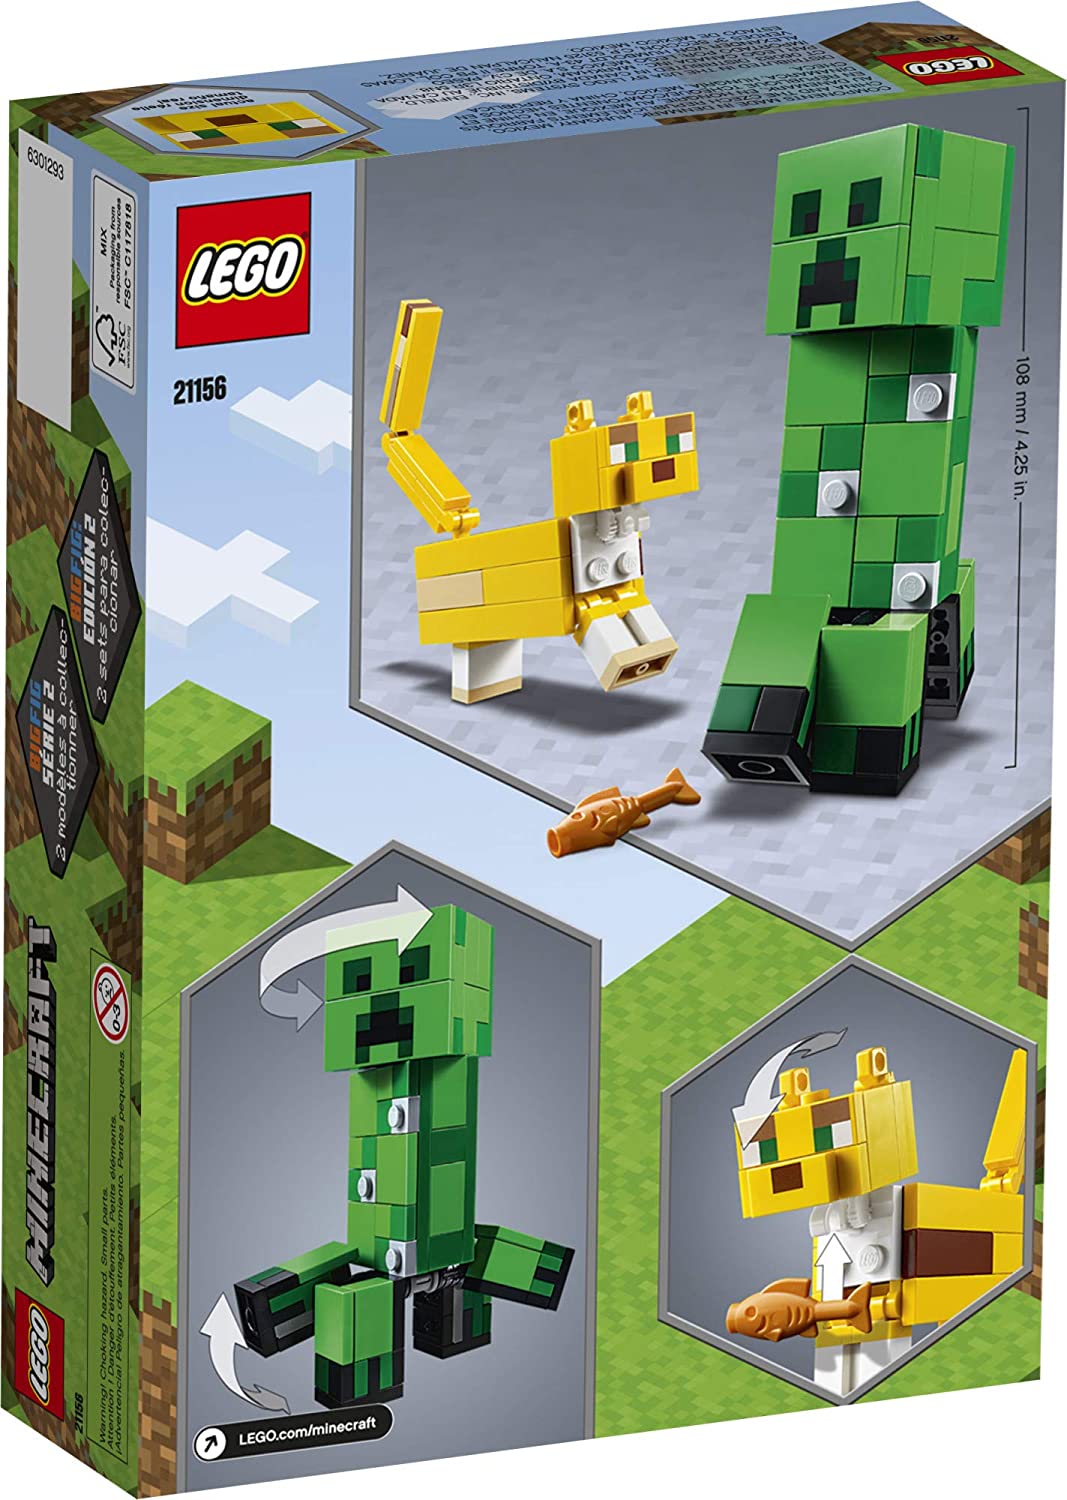 LEGO Minecraft Creeper BigFig and Ocelot Characters, 21156 (184 Pieces)